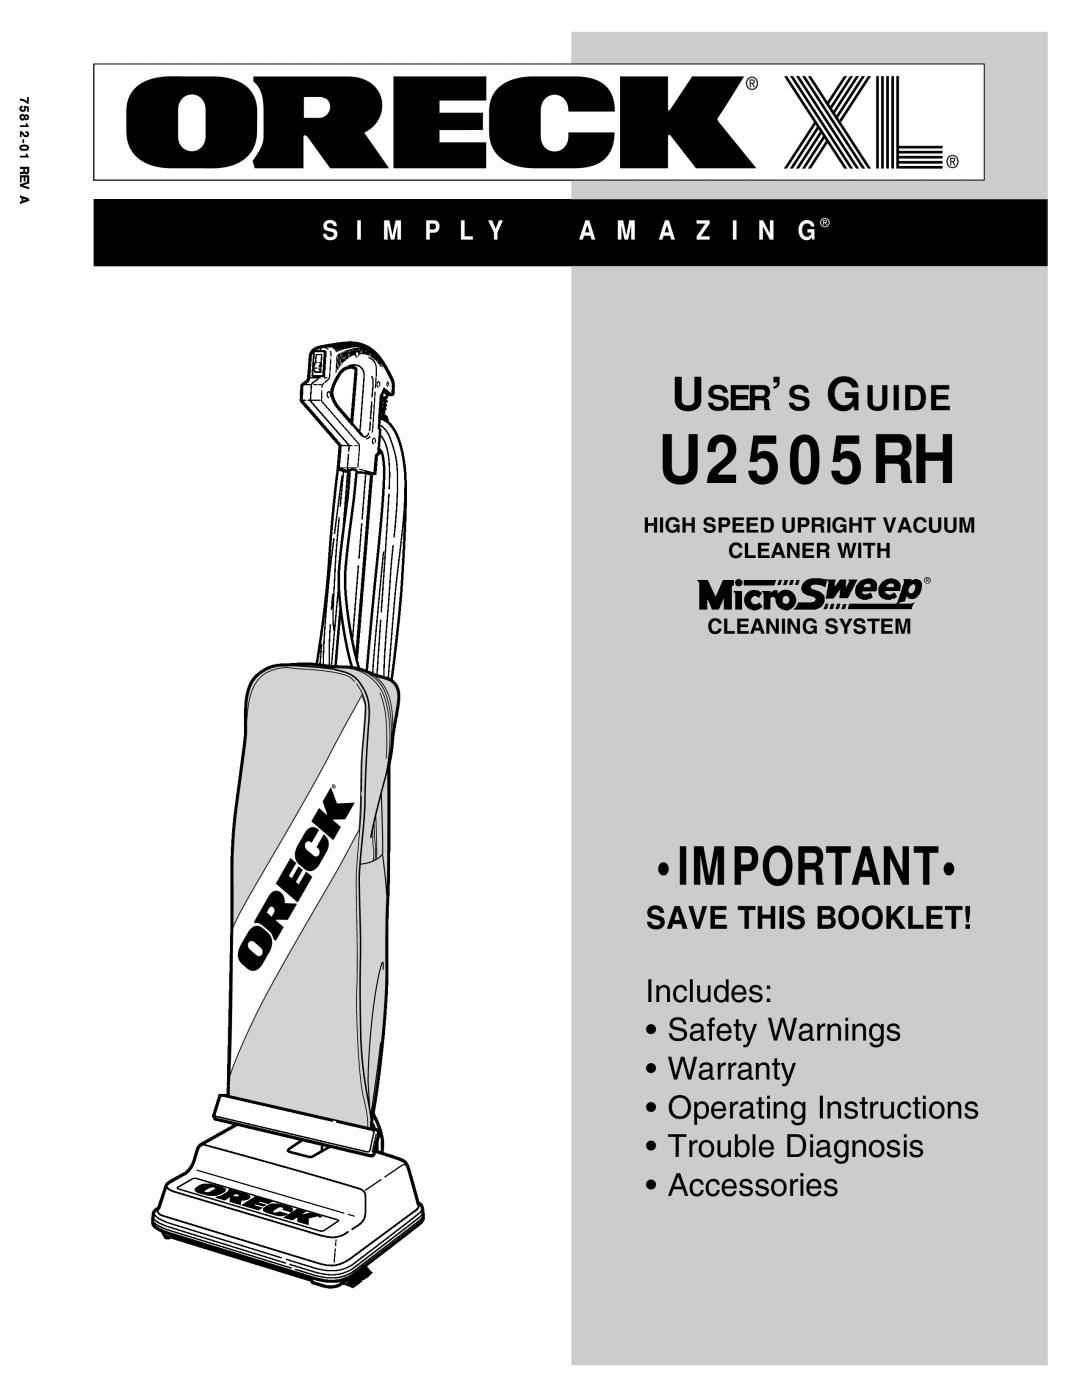 Oreck U2505RH warranty User’S Guide, S I M P L Y, A M A Z I N G, High Speed Upright Vacuum Cleaner With, Cleaning System 